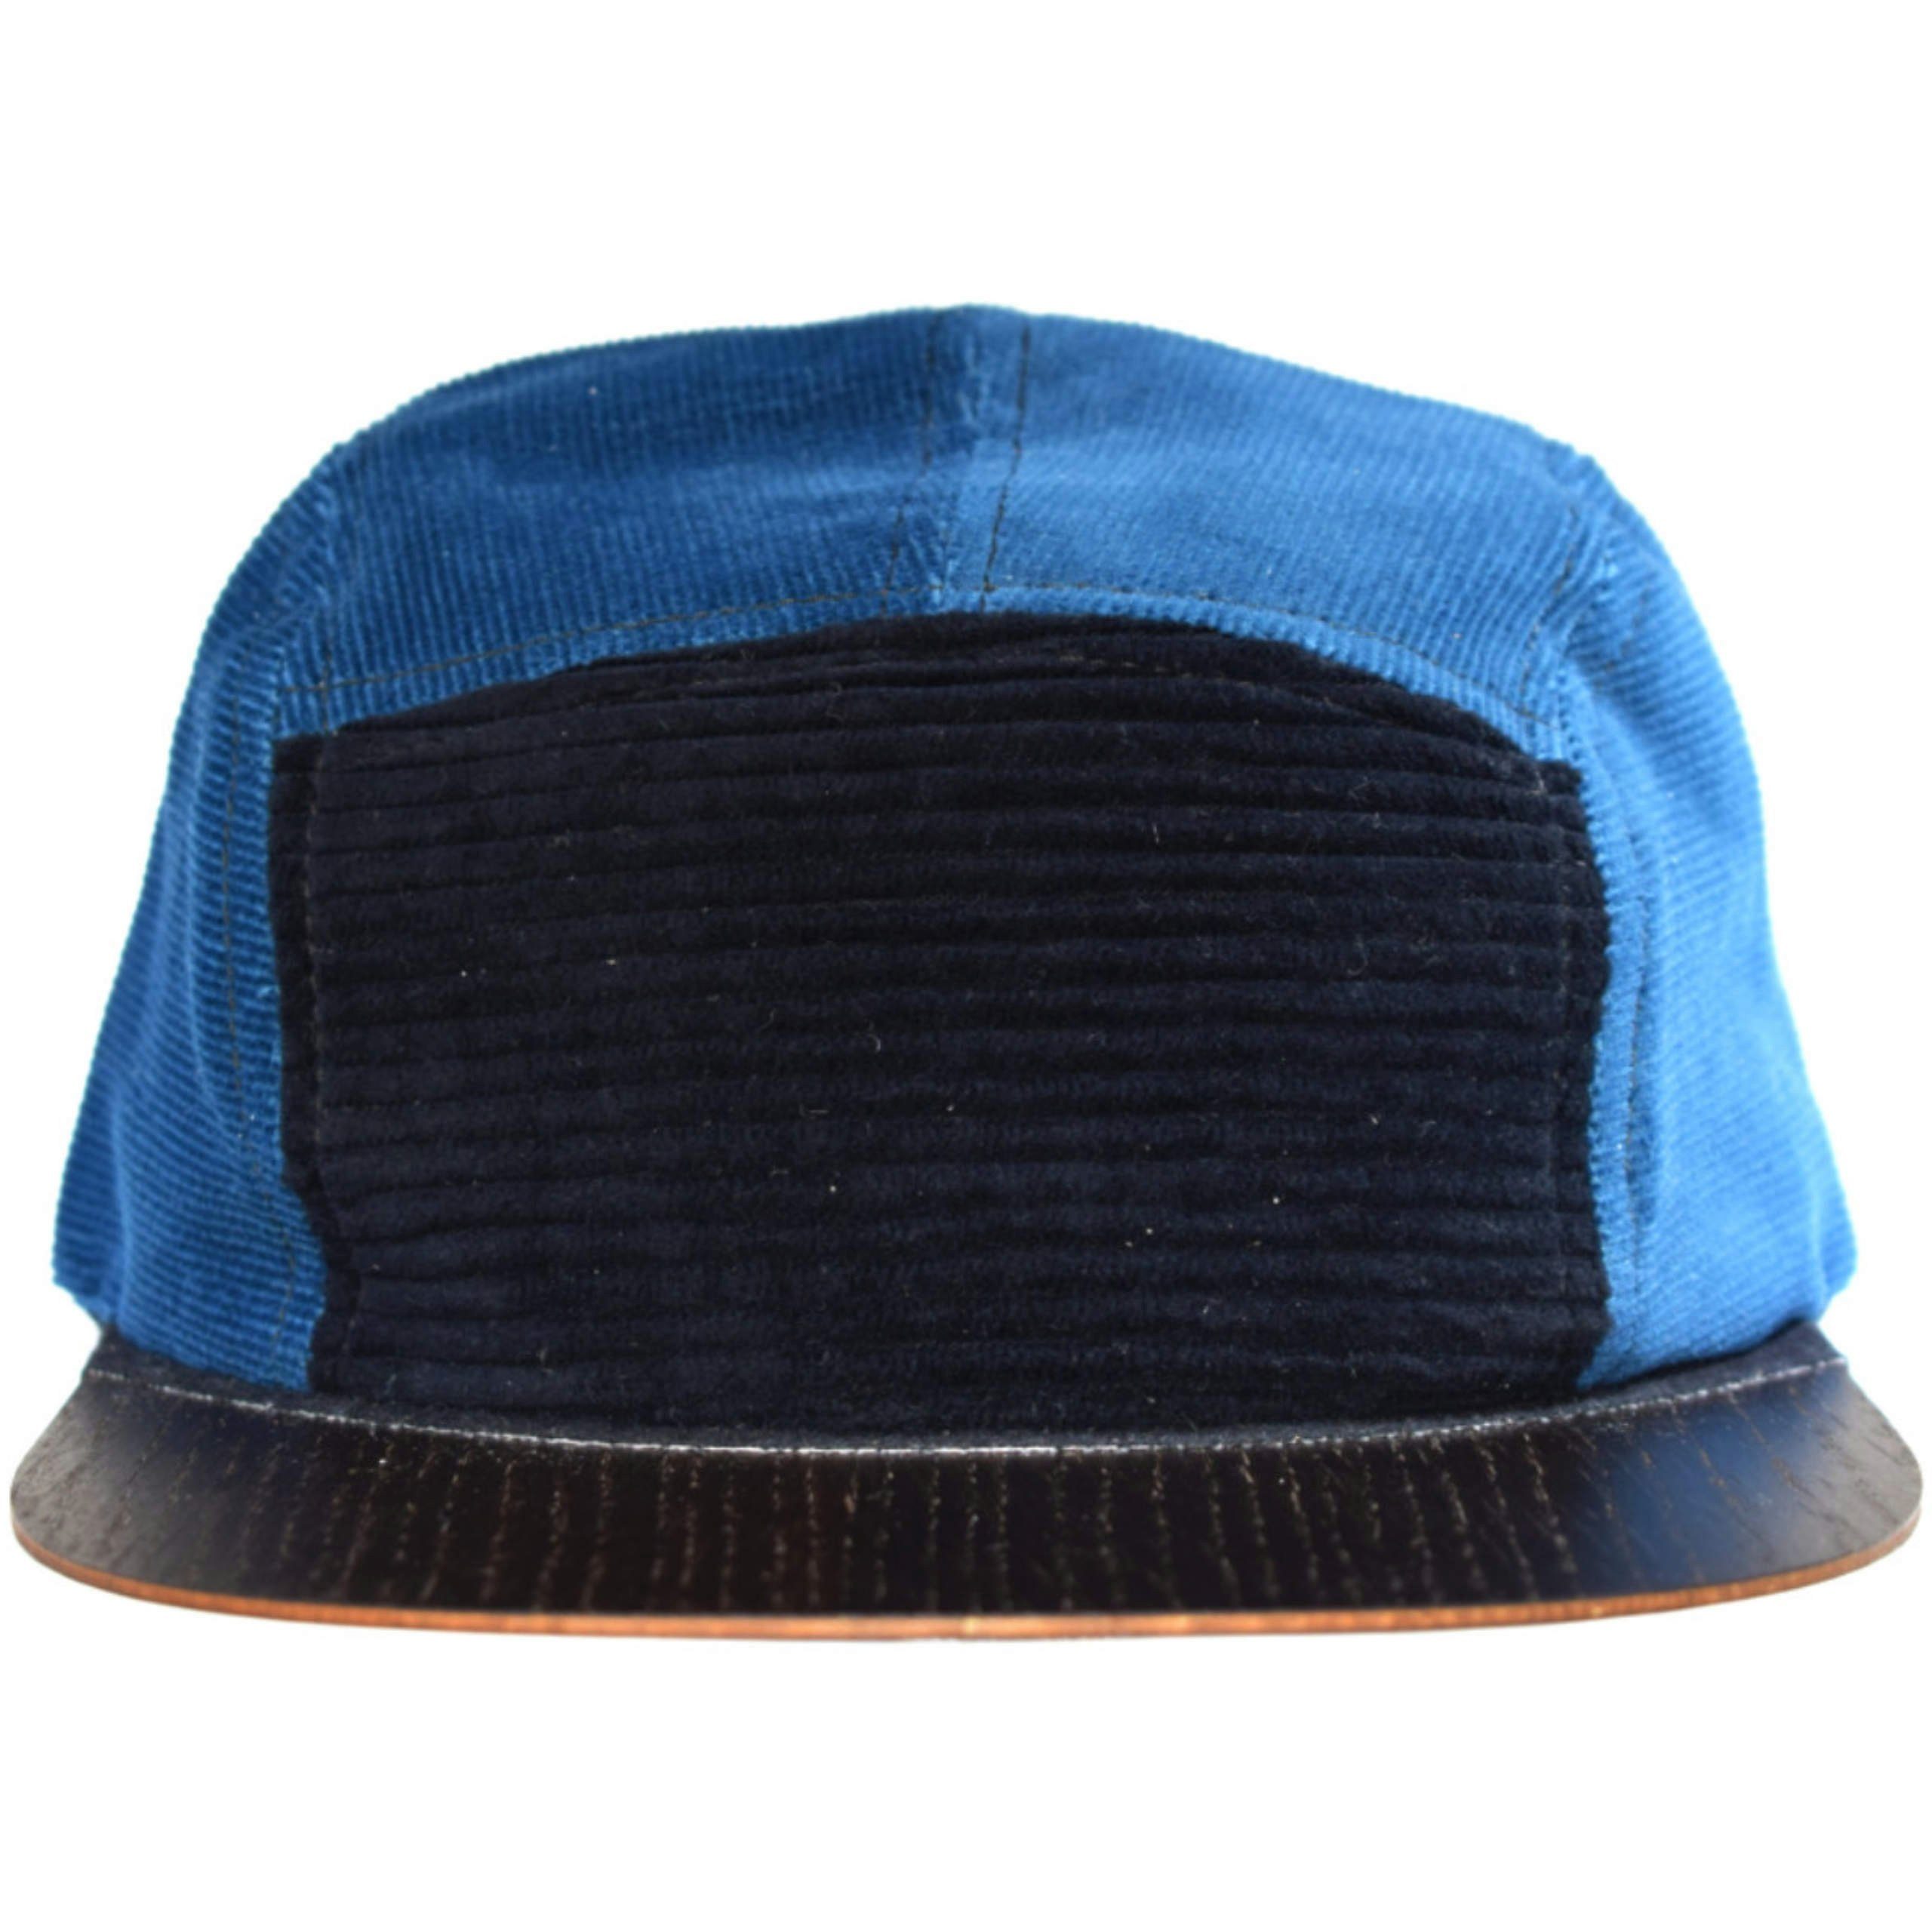 mit Cap in Snapback Germany Lou-i Holzschild Cap Holzschild Cord Made Blau